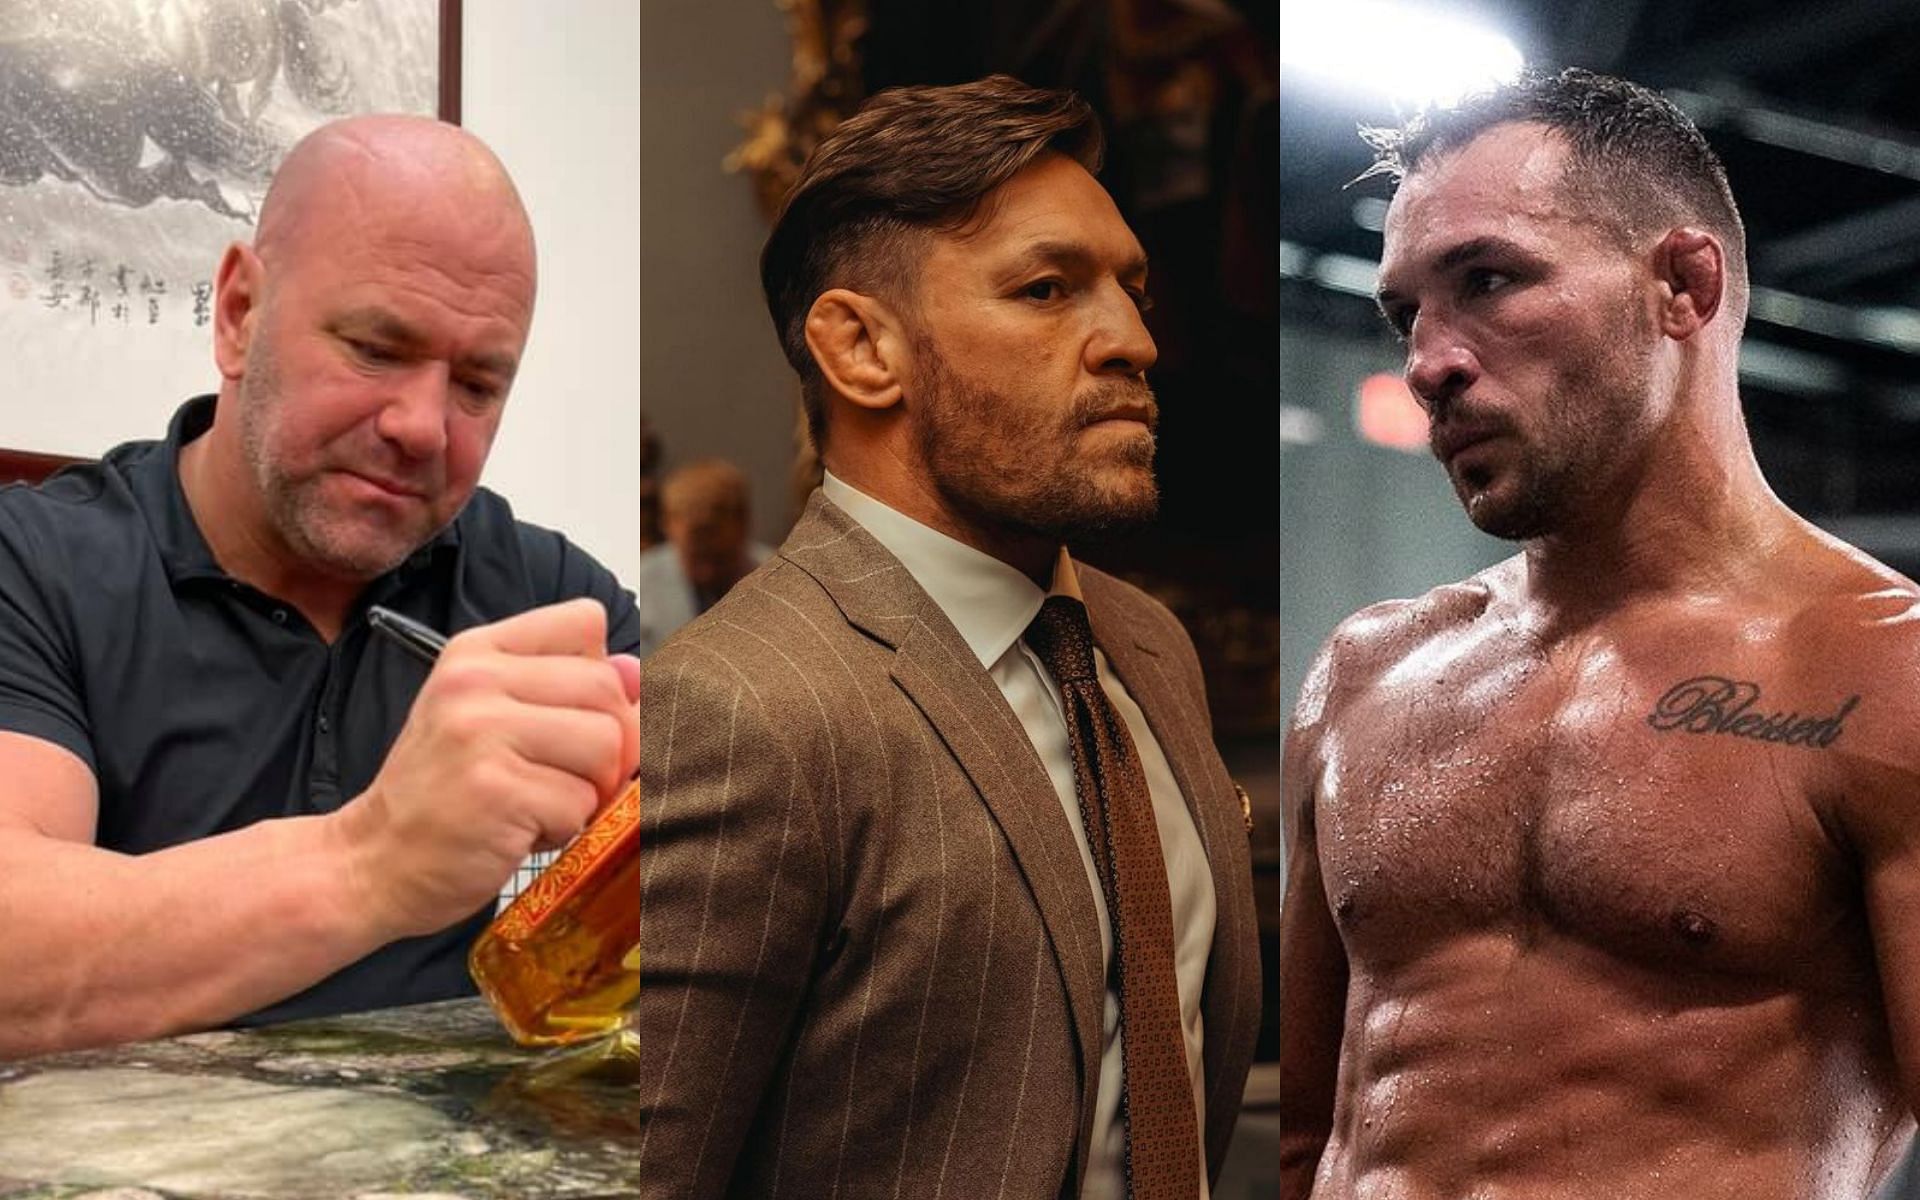 Dana White (left) addresses Conor McGregor (middle) pulling out of the fight against Michael Chandler (right) [Images courtesy @thenotoriosmma and @mikechandlermma on Instagram]